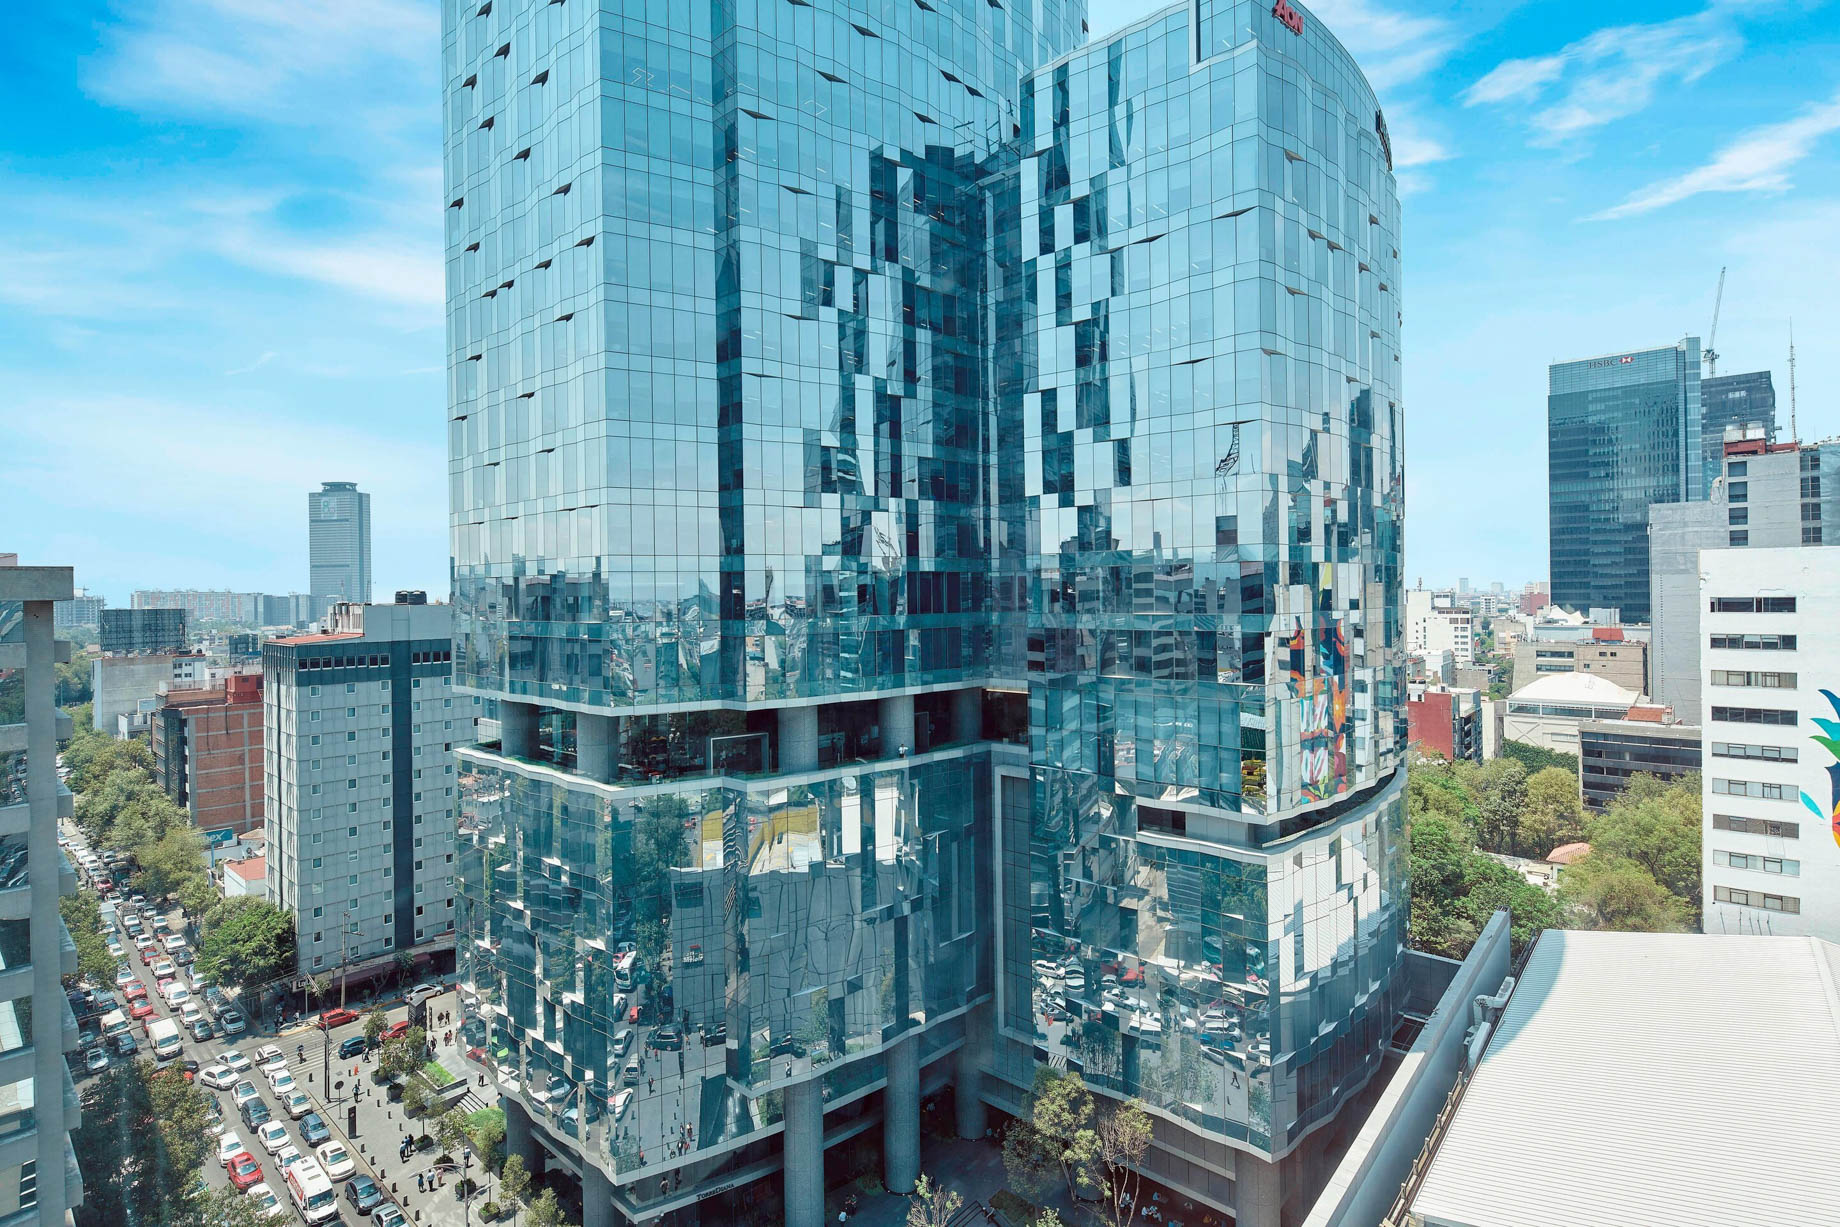 The St. Regis Mexico City Hotel - Mexico City, Mexico - Signature Guest Room View